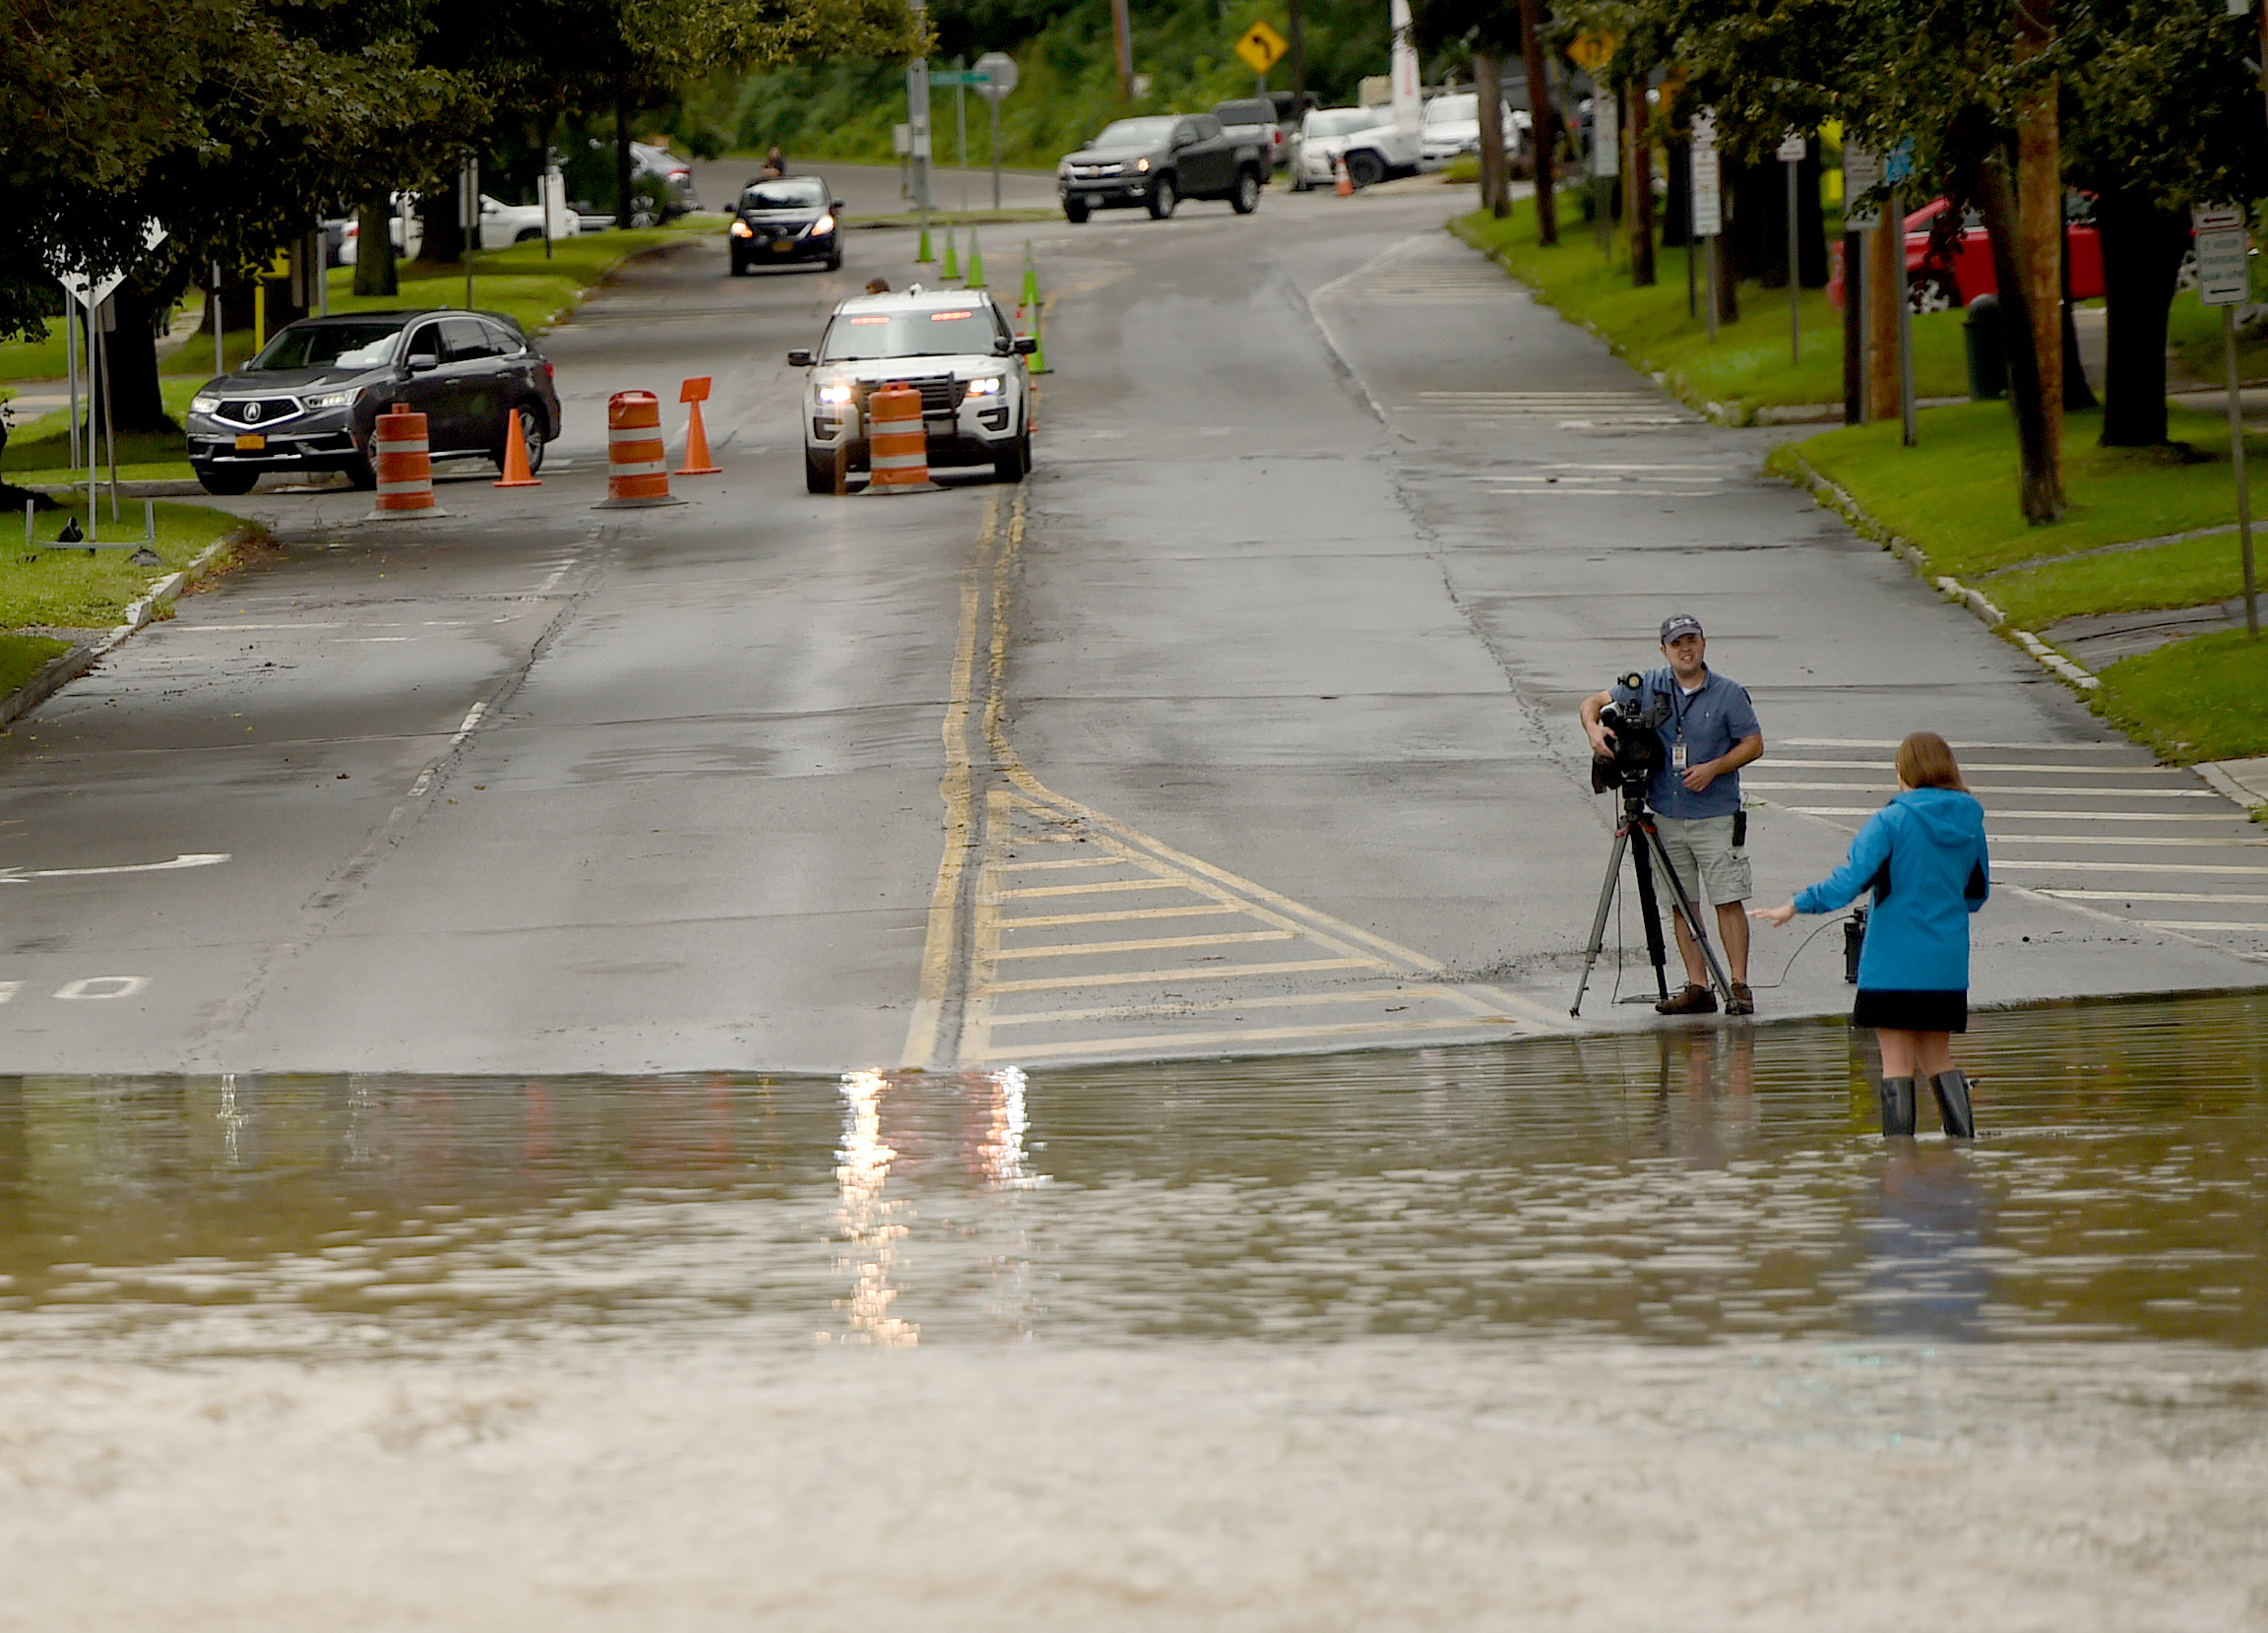 A  television crew tells their story on Genesee Street in Camillus August 19, 2021. Heavy rains again created flooding in Central New York. A lot of flooding occurred along Ninemile Creek in Camillus and Marcellus. Dennis Nett | dnett@syracuse.com